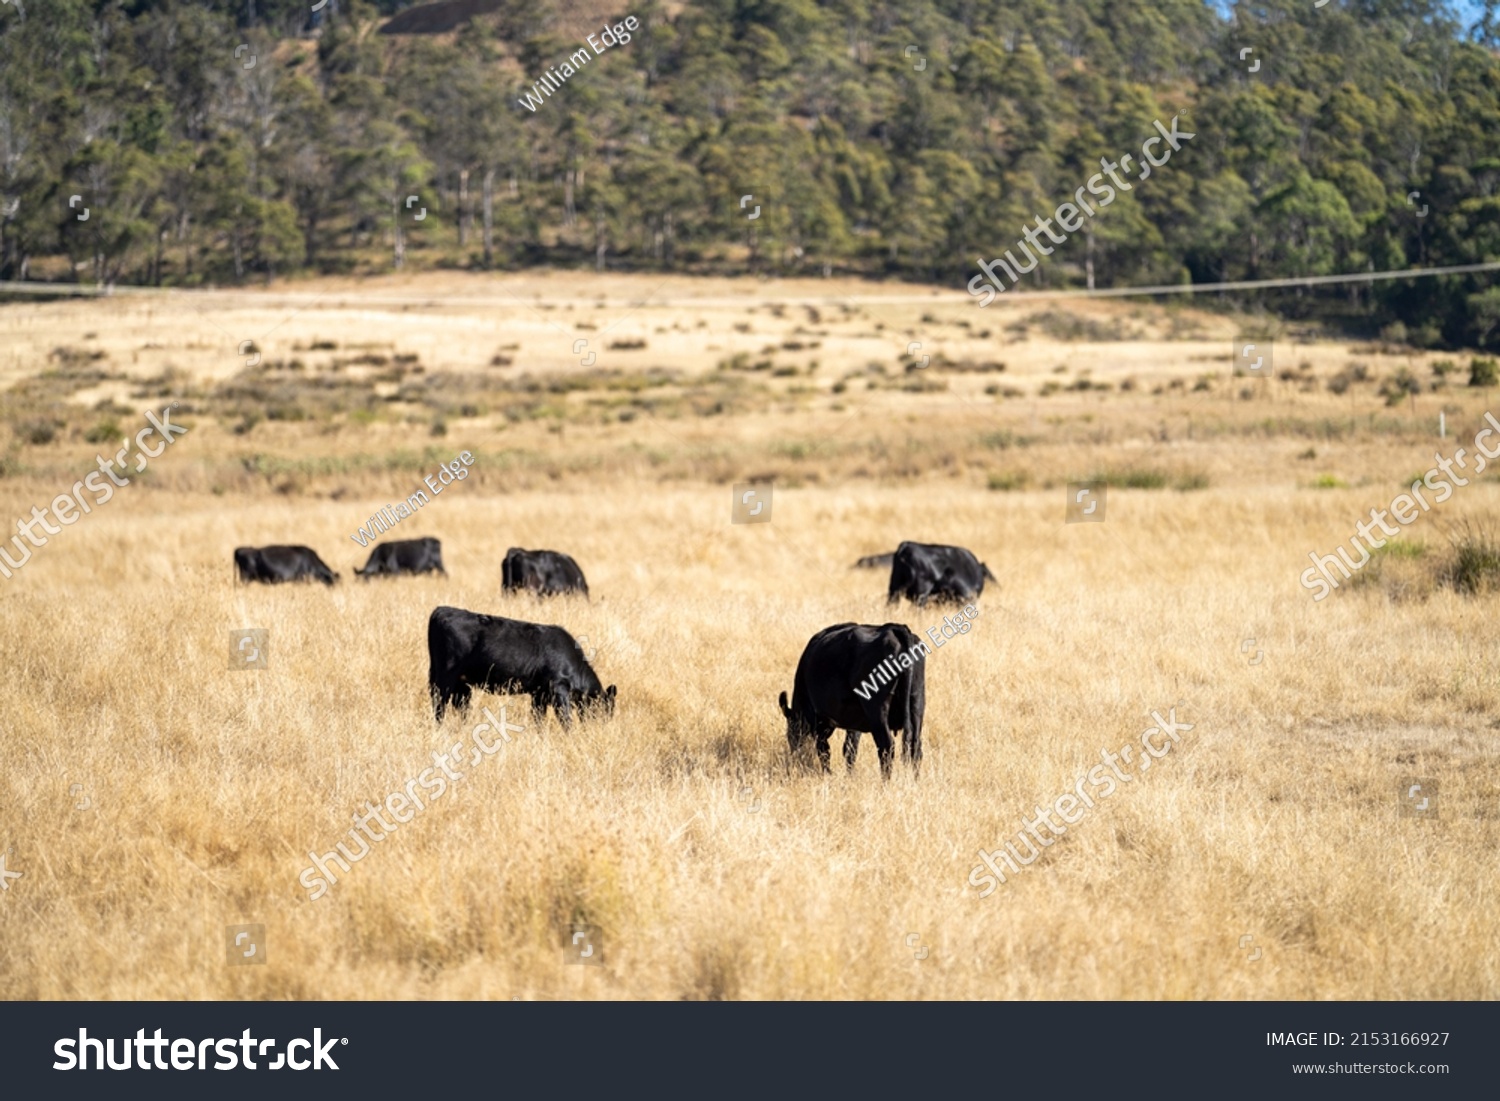 Beef cows and calves grazing on grass and pasture, Australia. eating hay and silage. breeds include speckled park, murray grey, angus and brangus. #2153166927